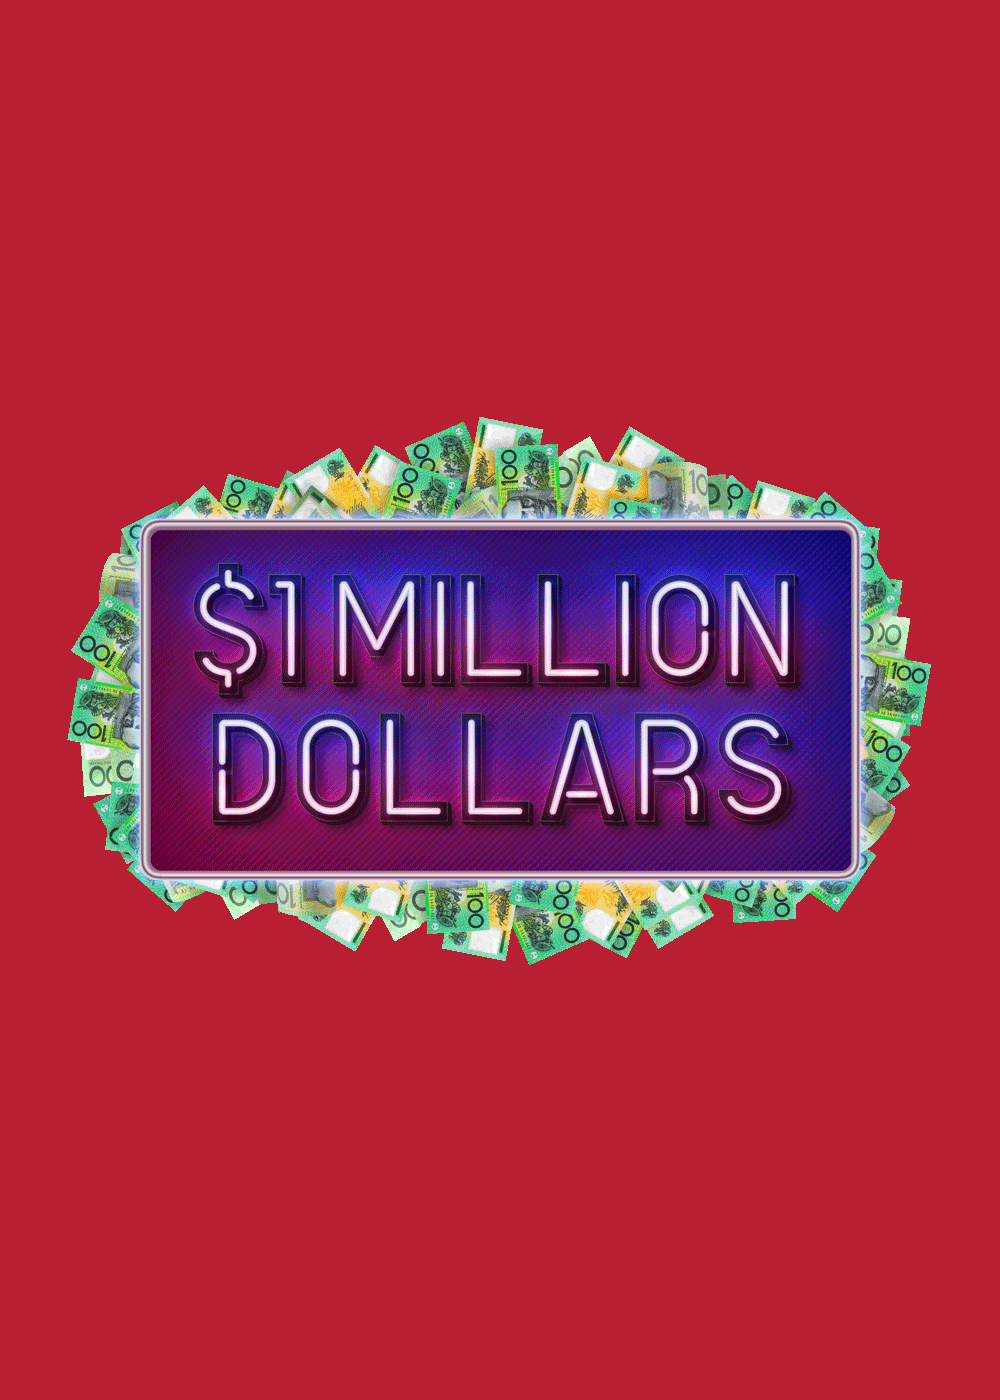 $1Million Dollars in a neon sign with a cash boarder on a red background animated to flash